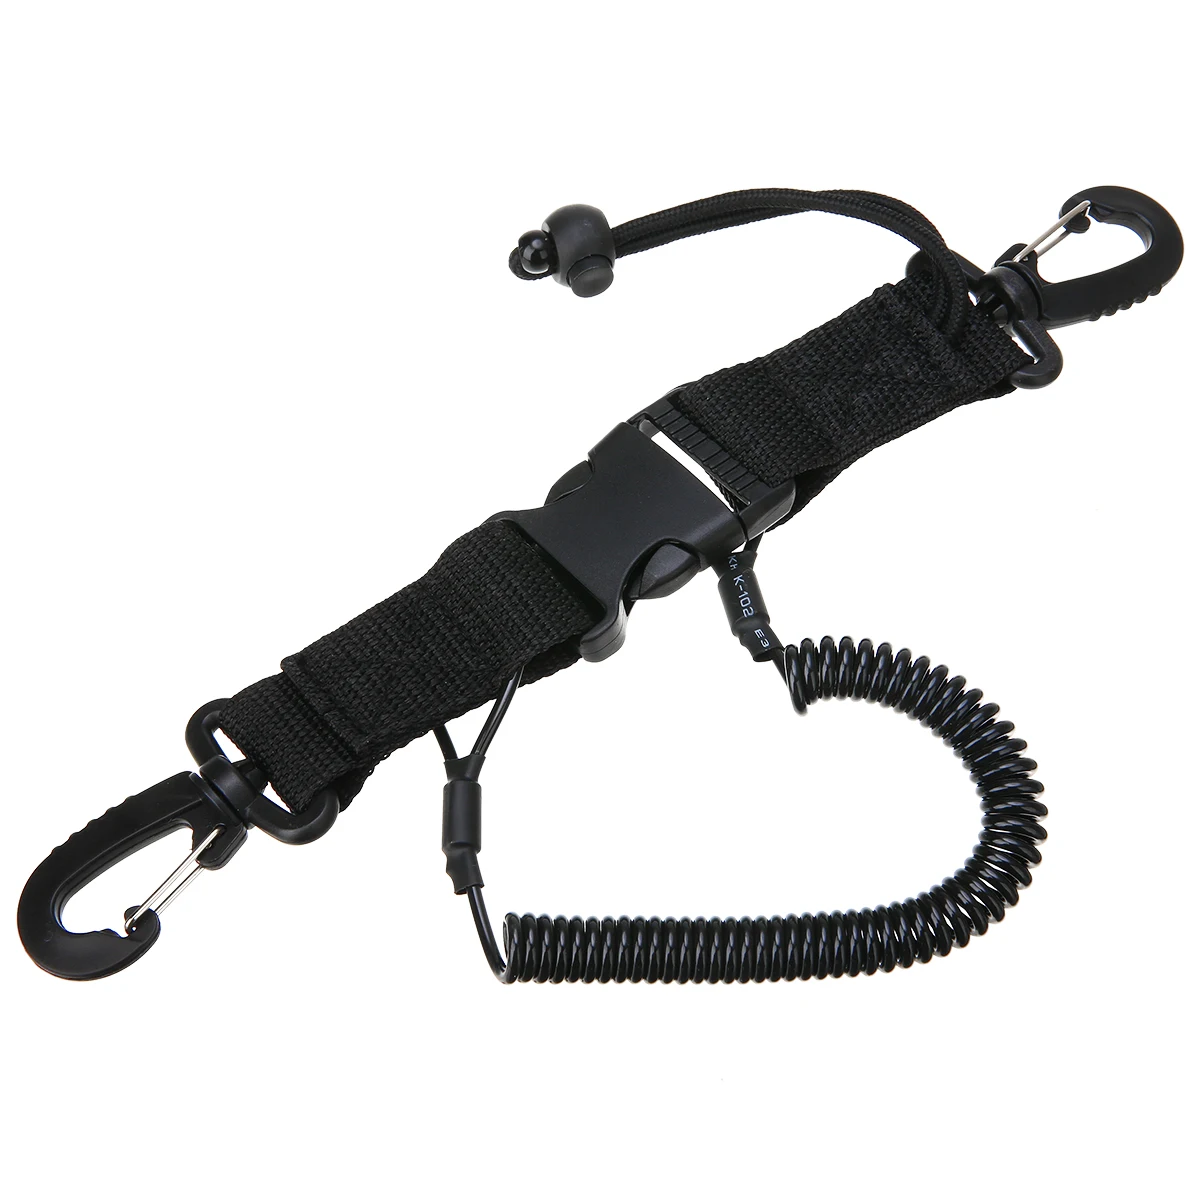 Mayitr 1 pcs Lanyard Spring Coil  Diving Dive Camera Scuba Diving Dive With Quick Release Buckle and Clips for Diving Outdoor